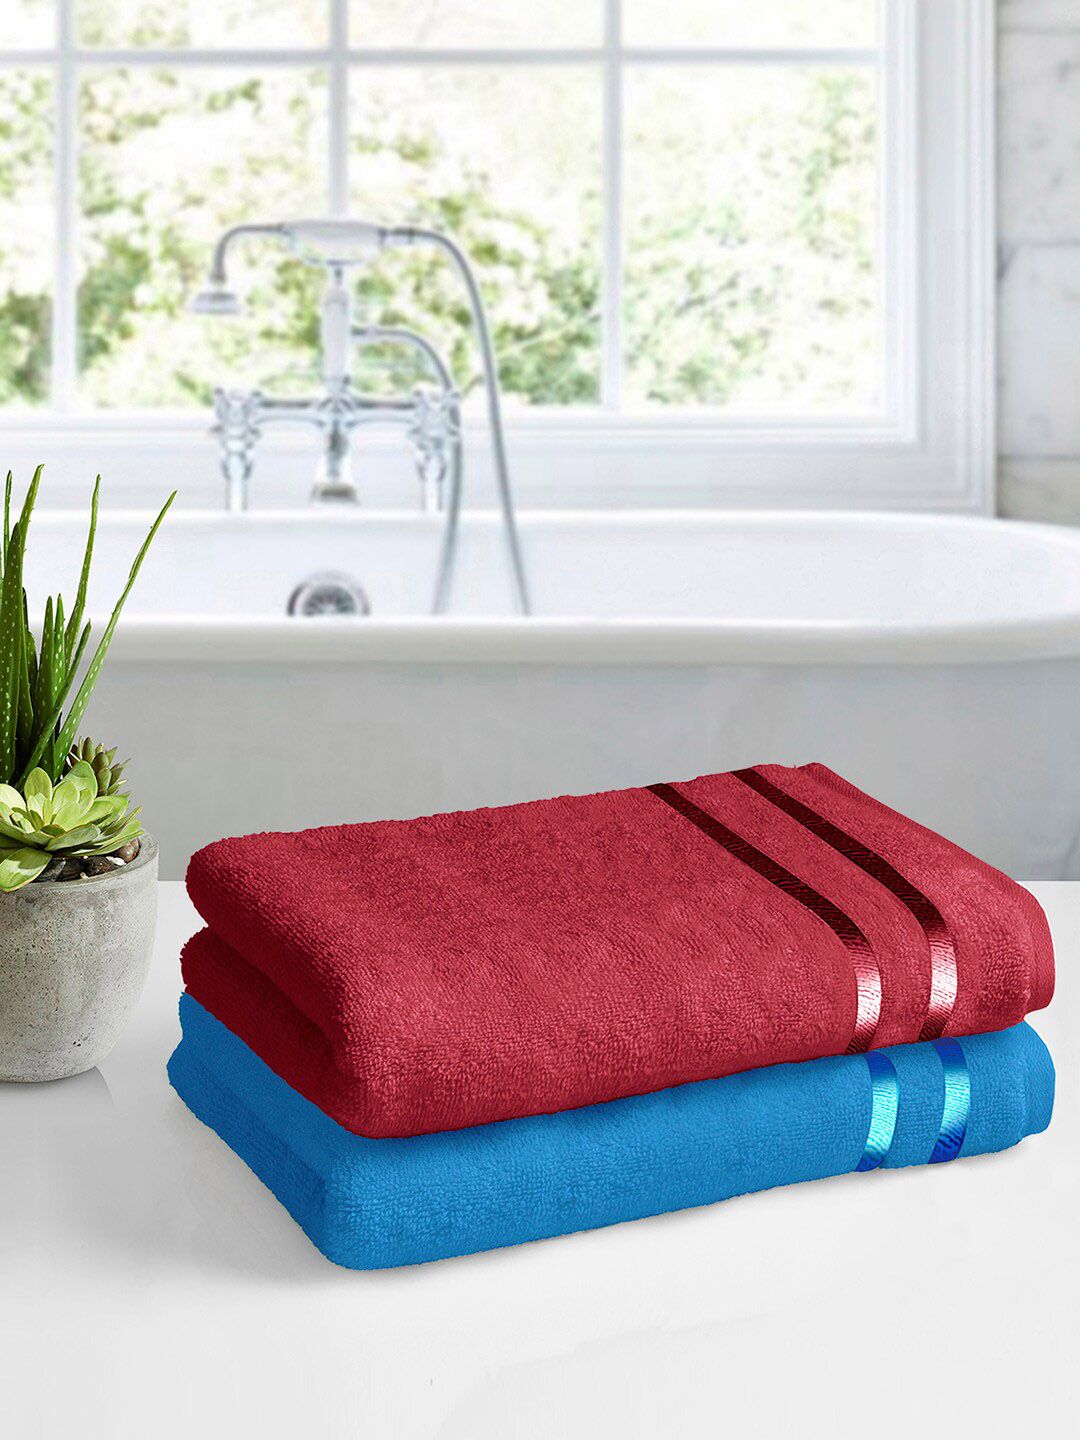 Story@home Set Of 2 Blue & Red 450GSM Super Absorbent Cotton Medium Size Bath Towels Price in India